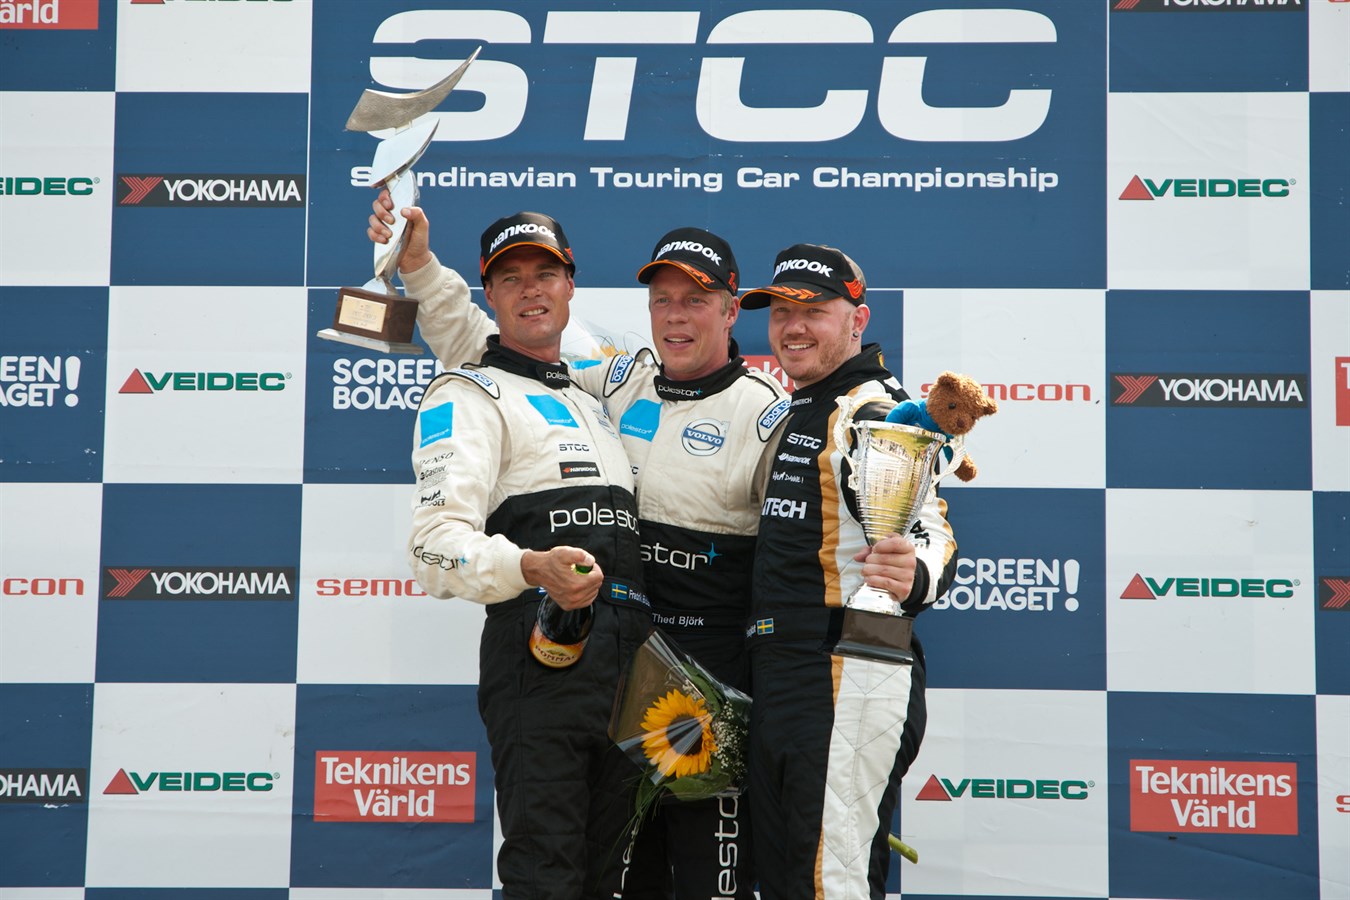 Double victory for Volvo Polestar Racing in Falkenberg